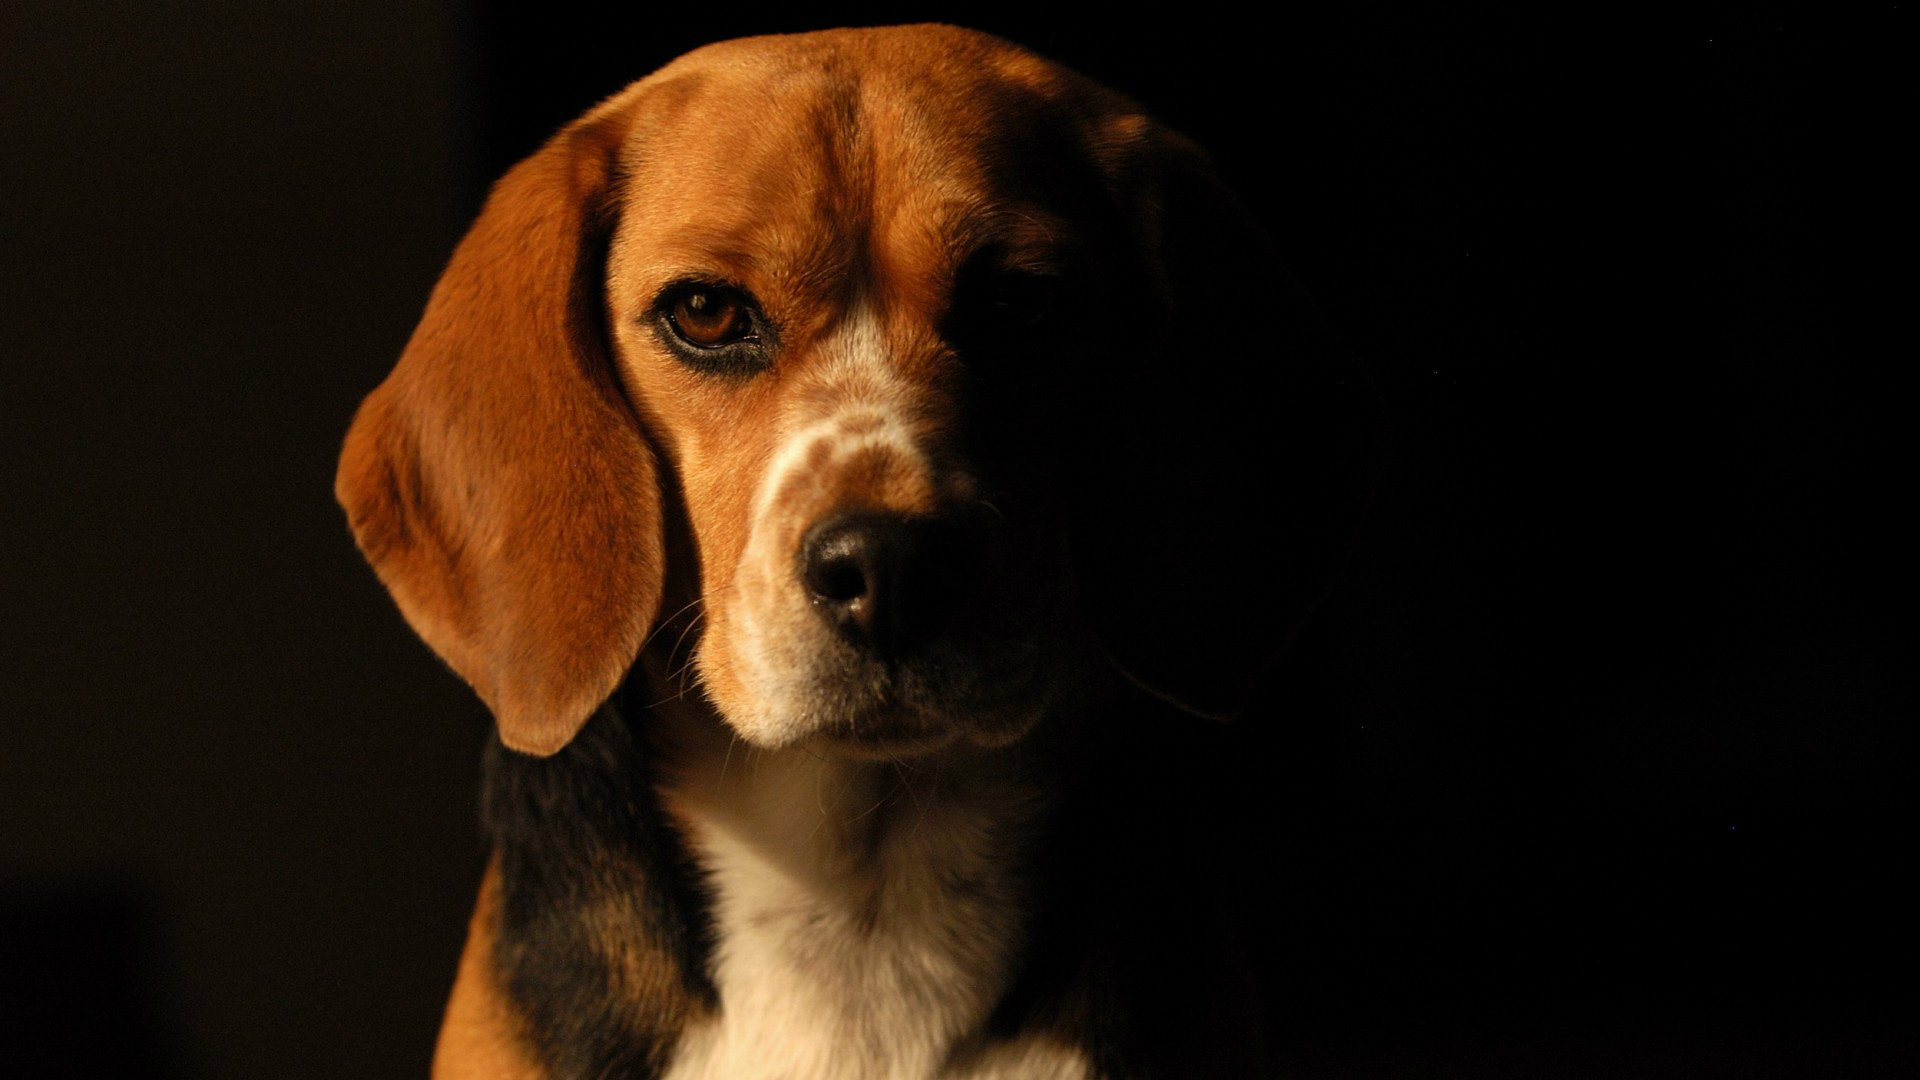 Download full hd 1920x1080 Beagle PC background ID:294233 for free